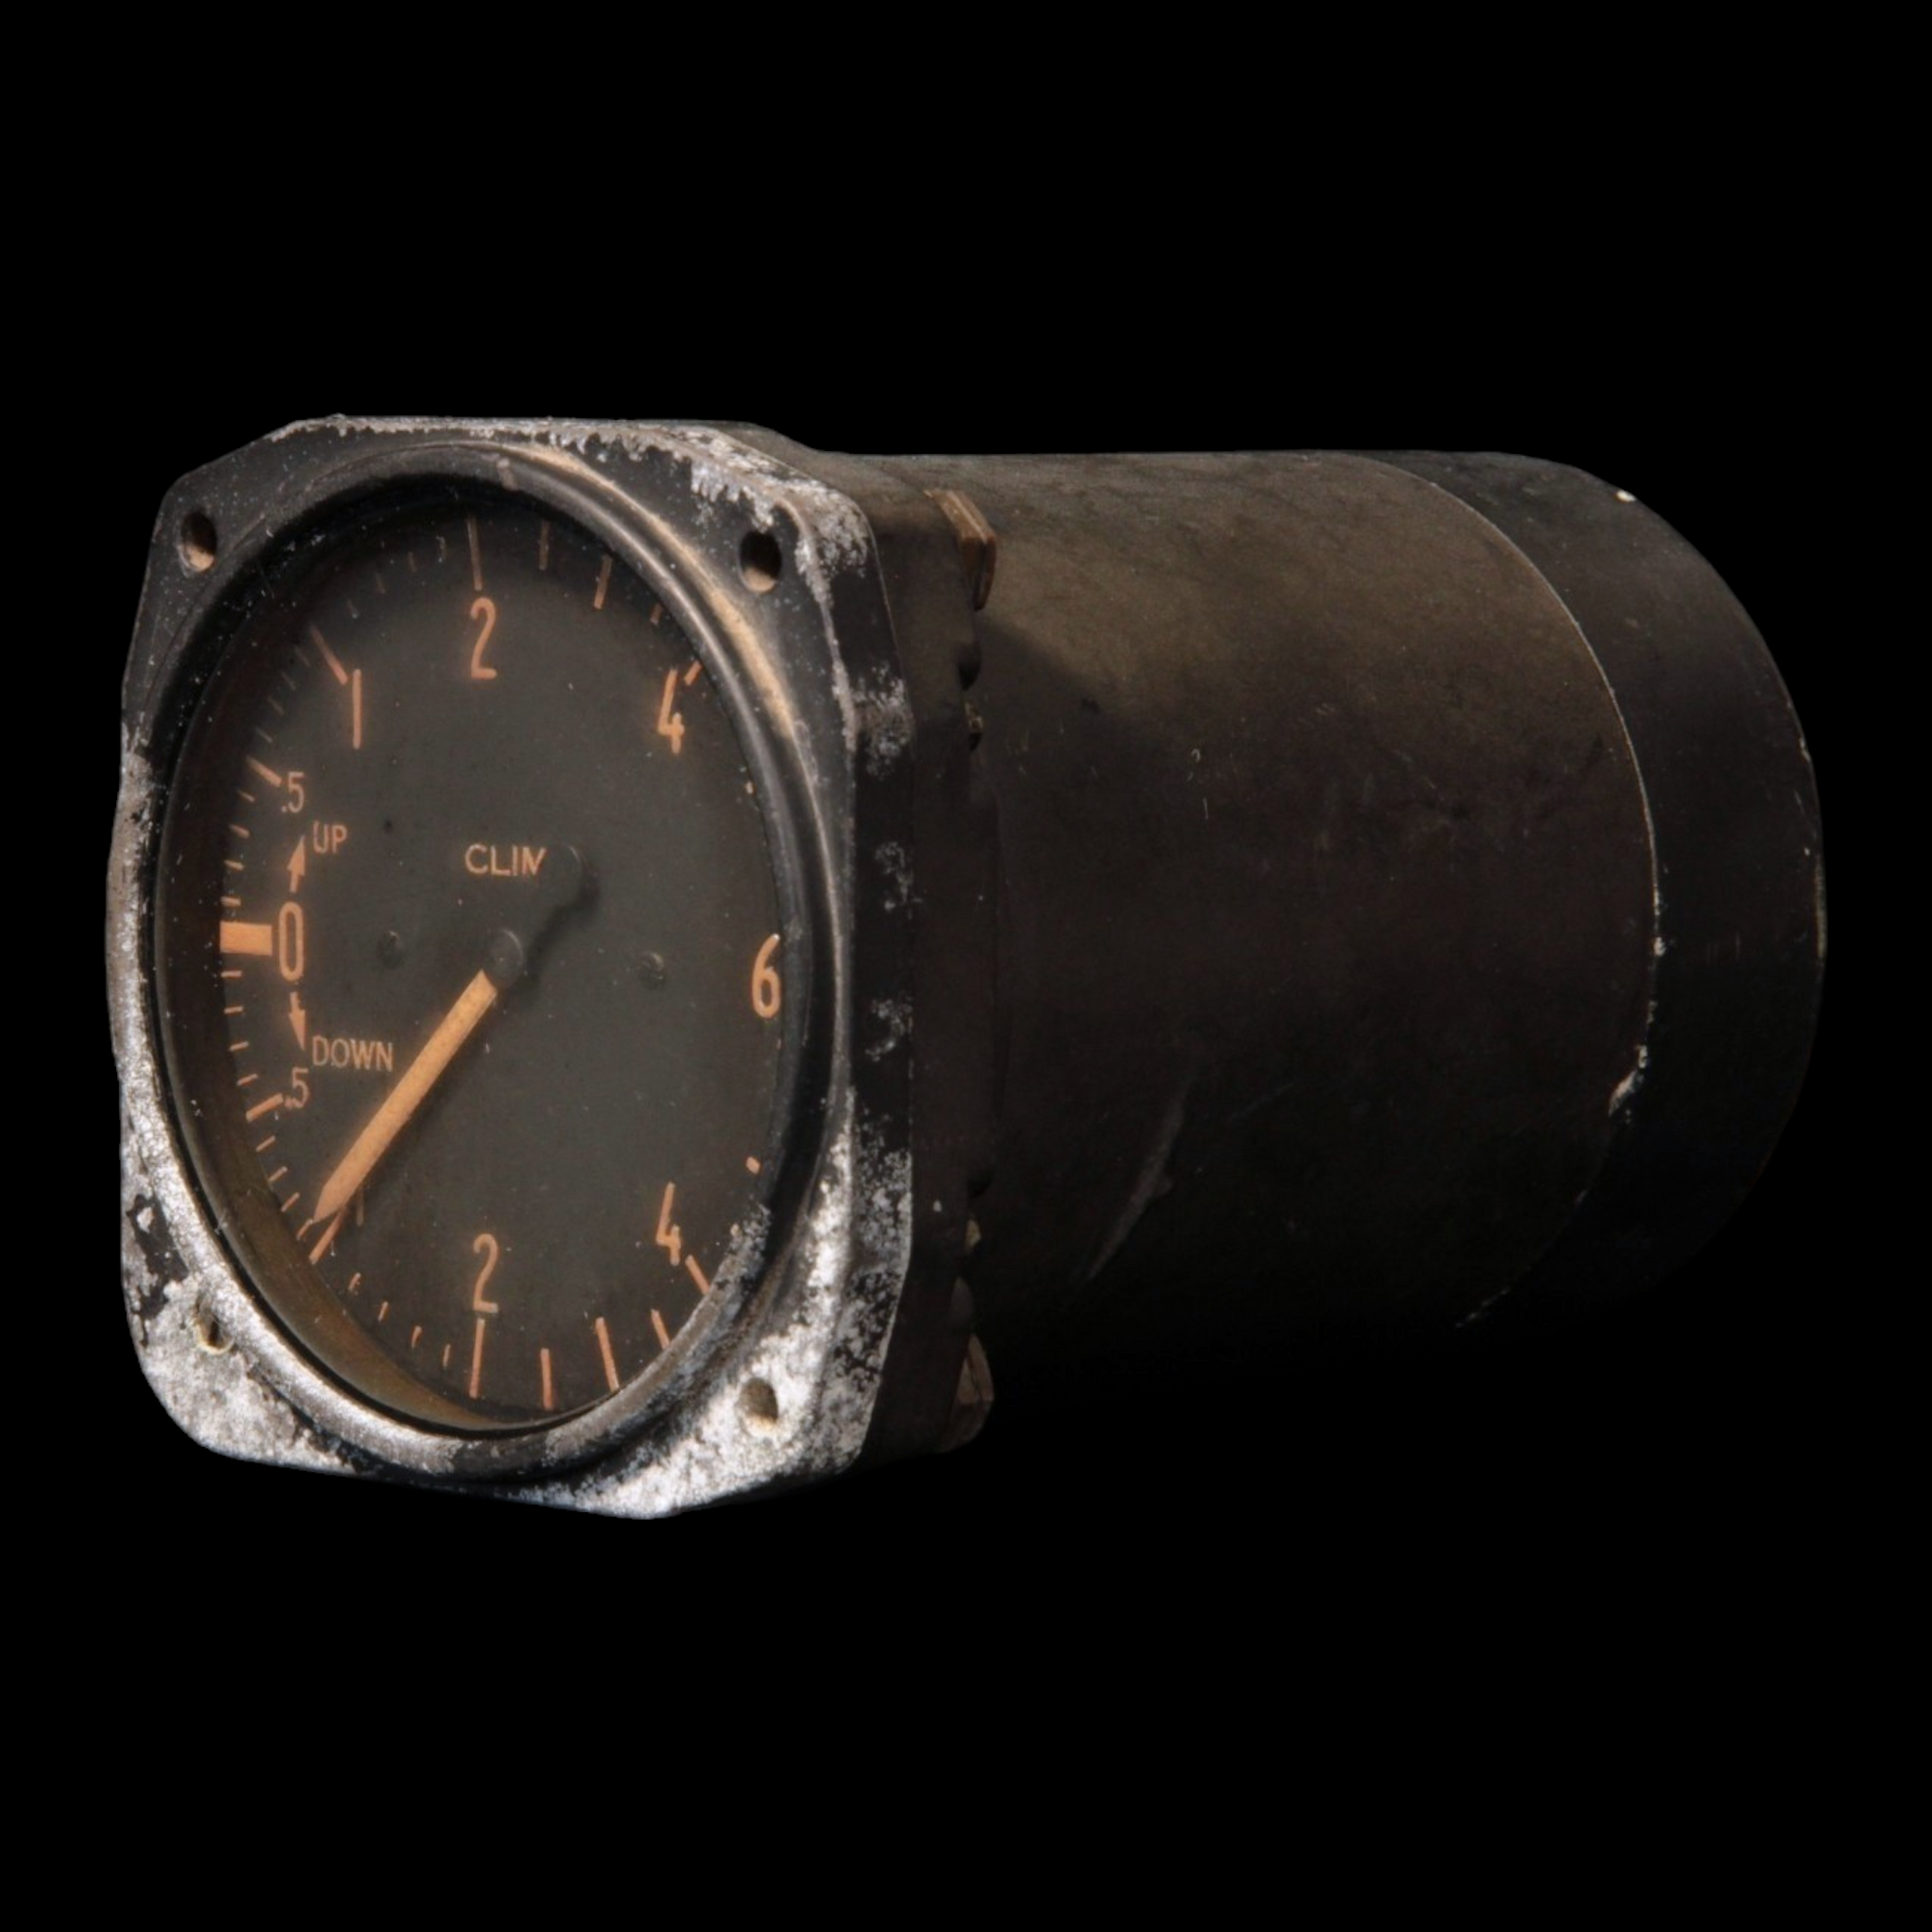 WWII Aircraft Instrument, Rate of Climb Indicator, Type C–2 - 1940s - World War II